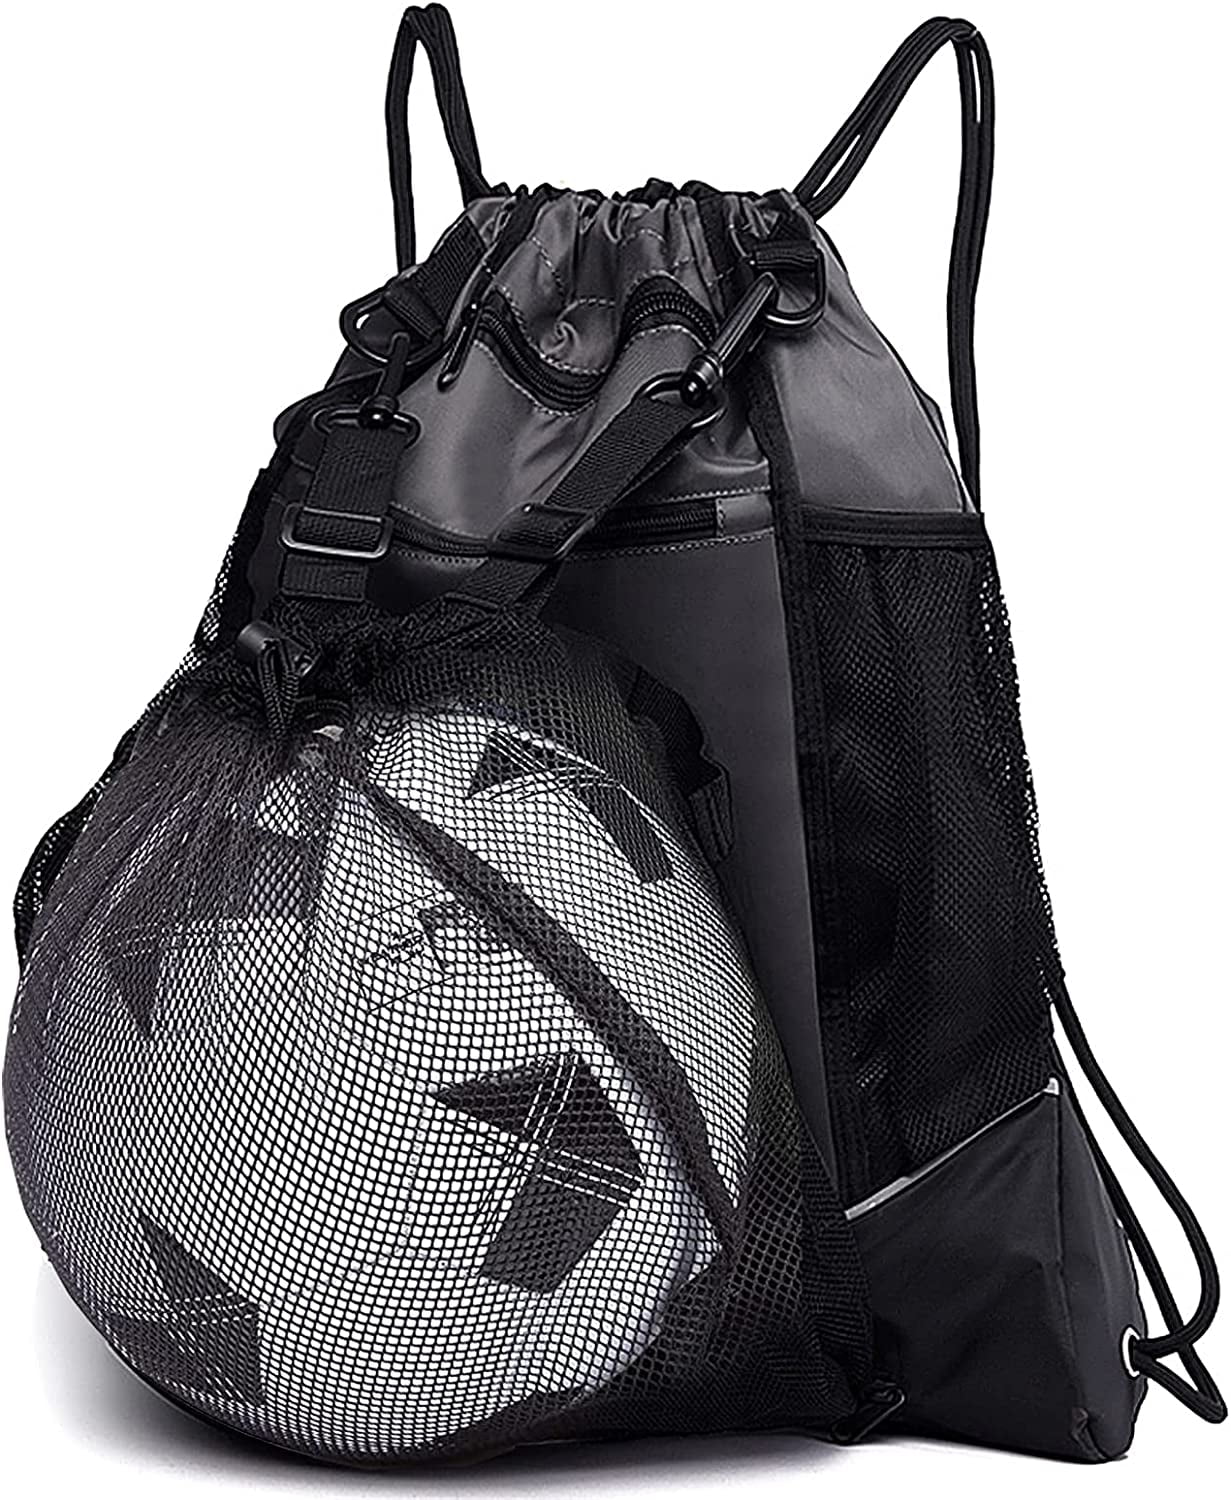 Basketball Bag with Compartment Volleyball Foldable Soccer Backpack Gym Bag Basketball Backpack with Detachable Ball Mesh 